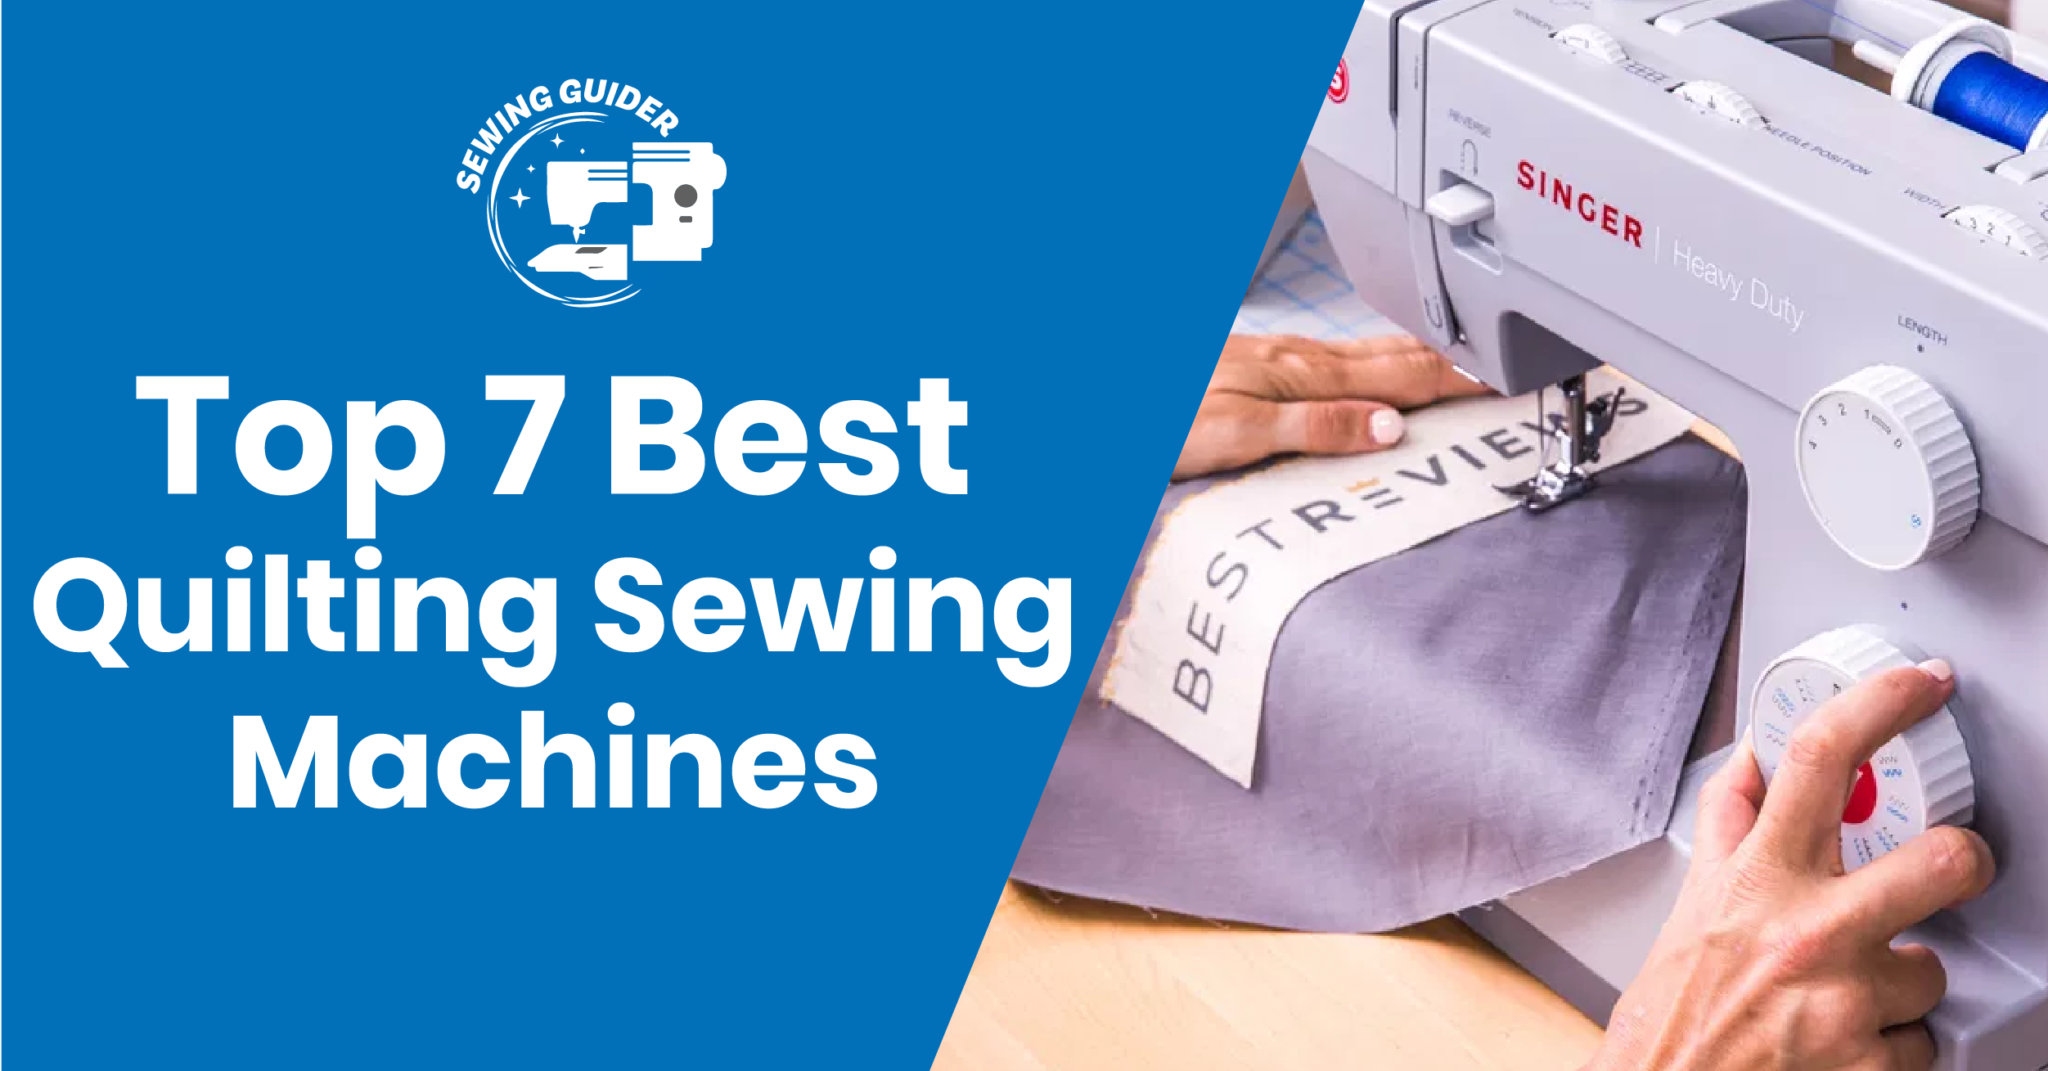 Top 7 Best Quilting Sewing Machines For Your Creative Projects - 2023 ...